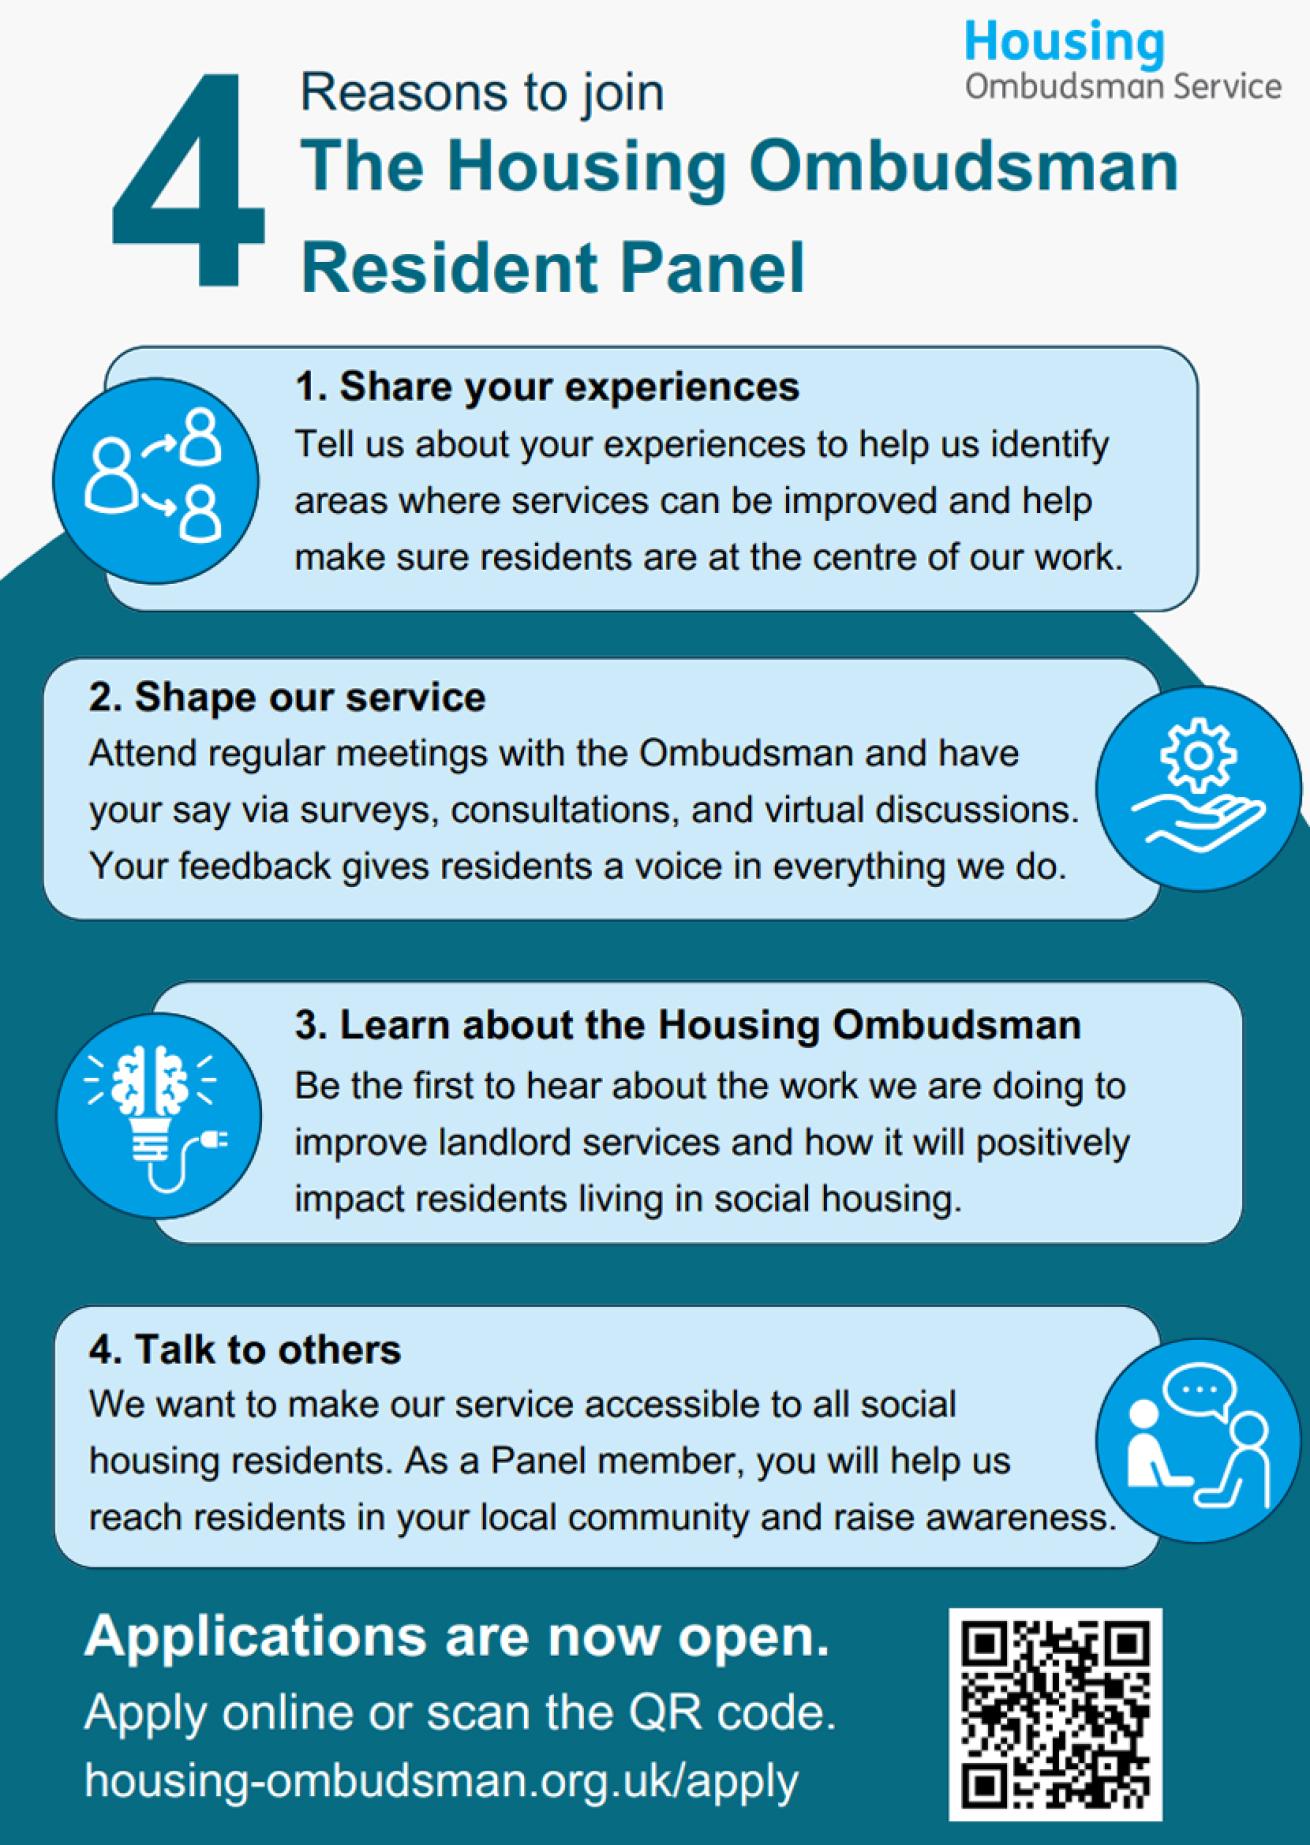 Housing Ombudsman Resident Panel poster which details the application process